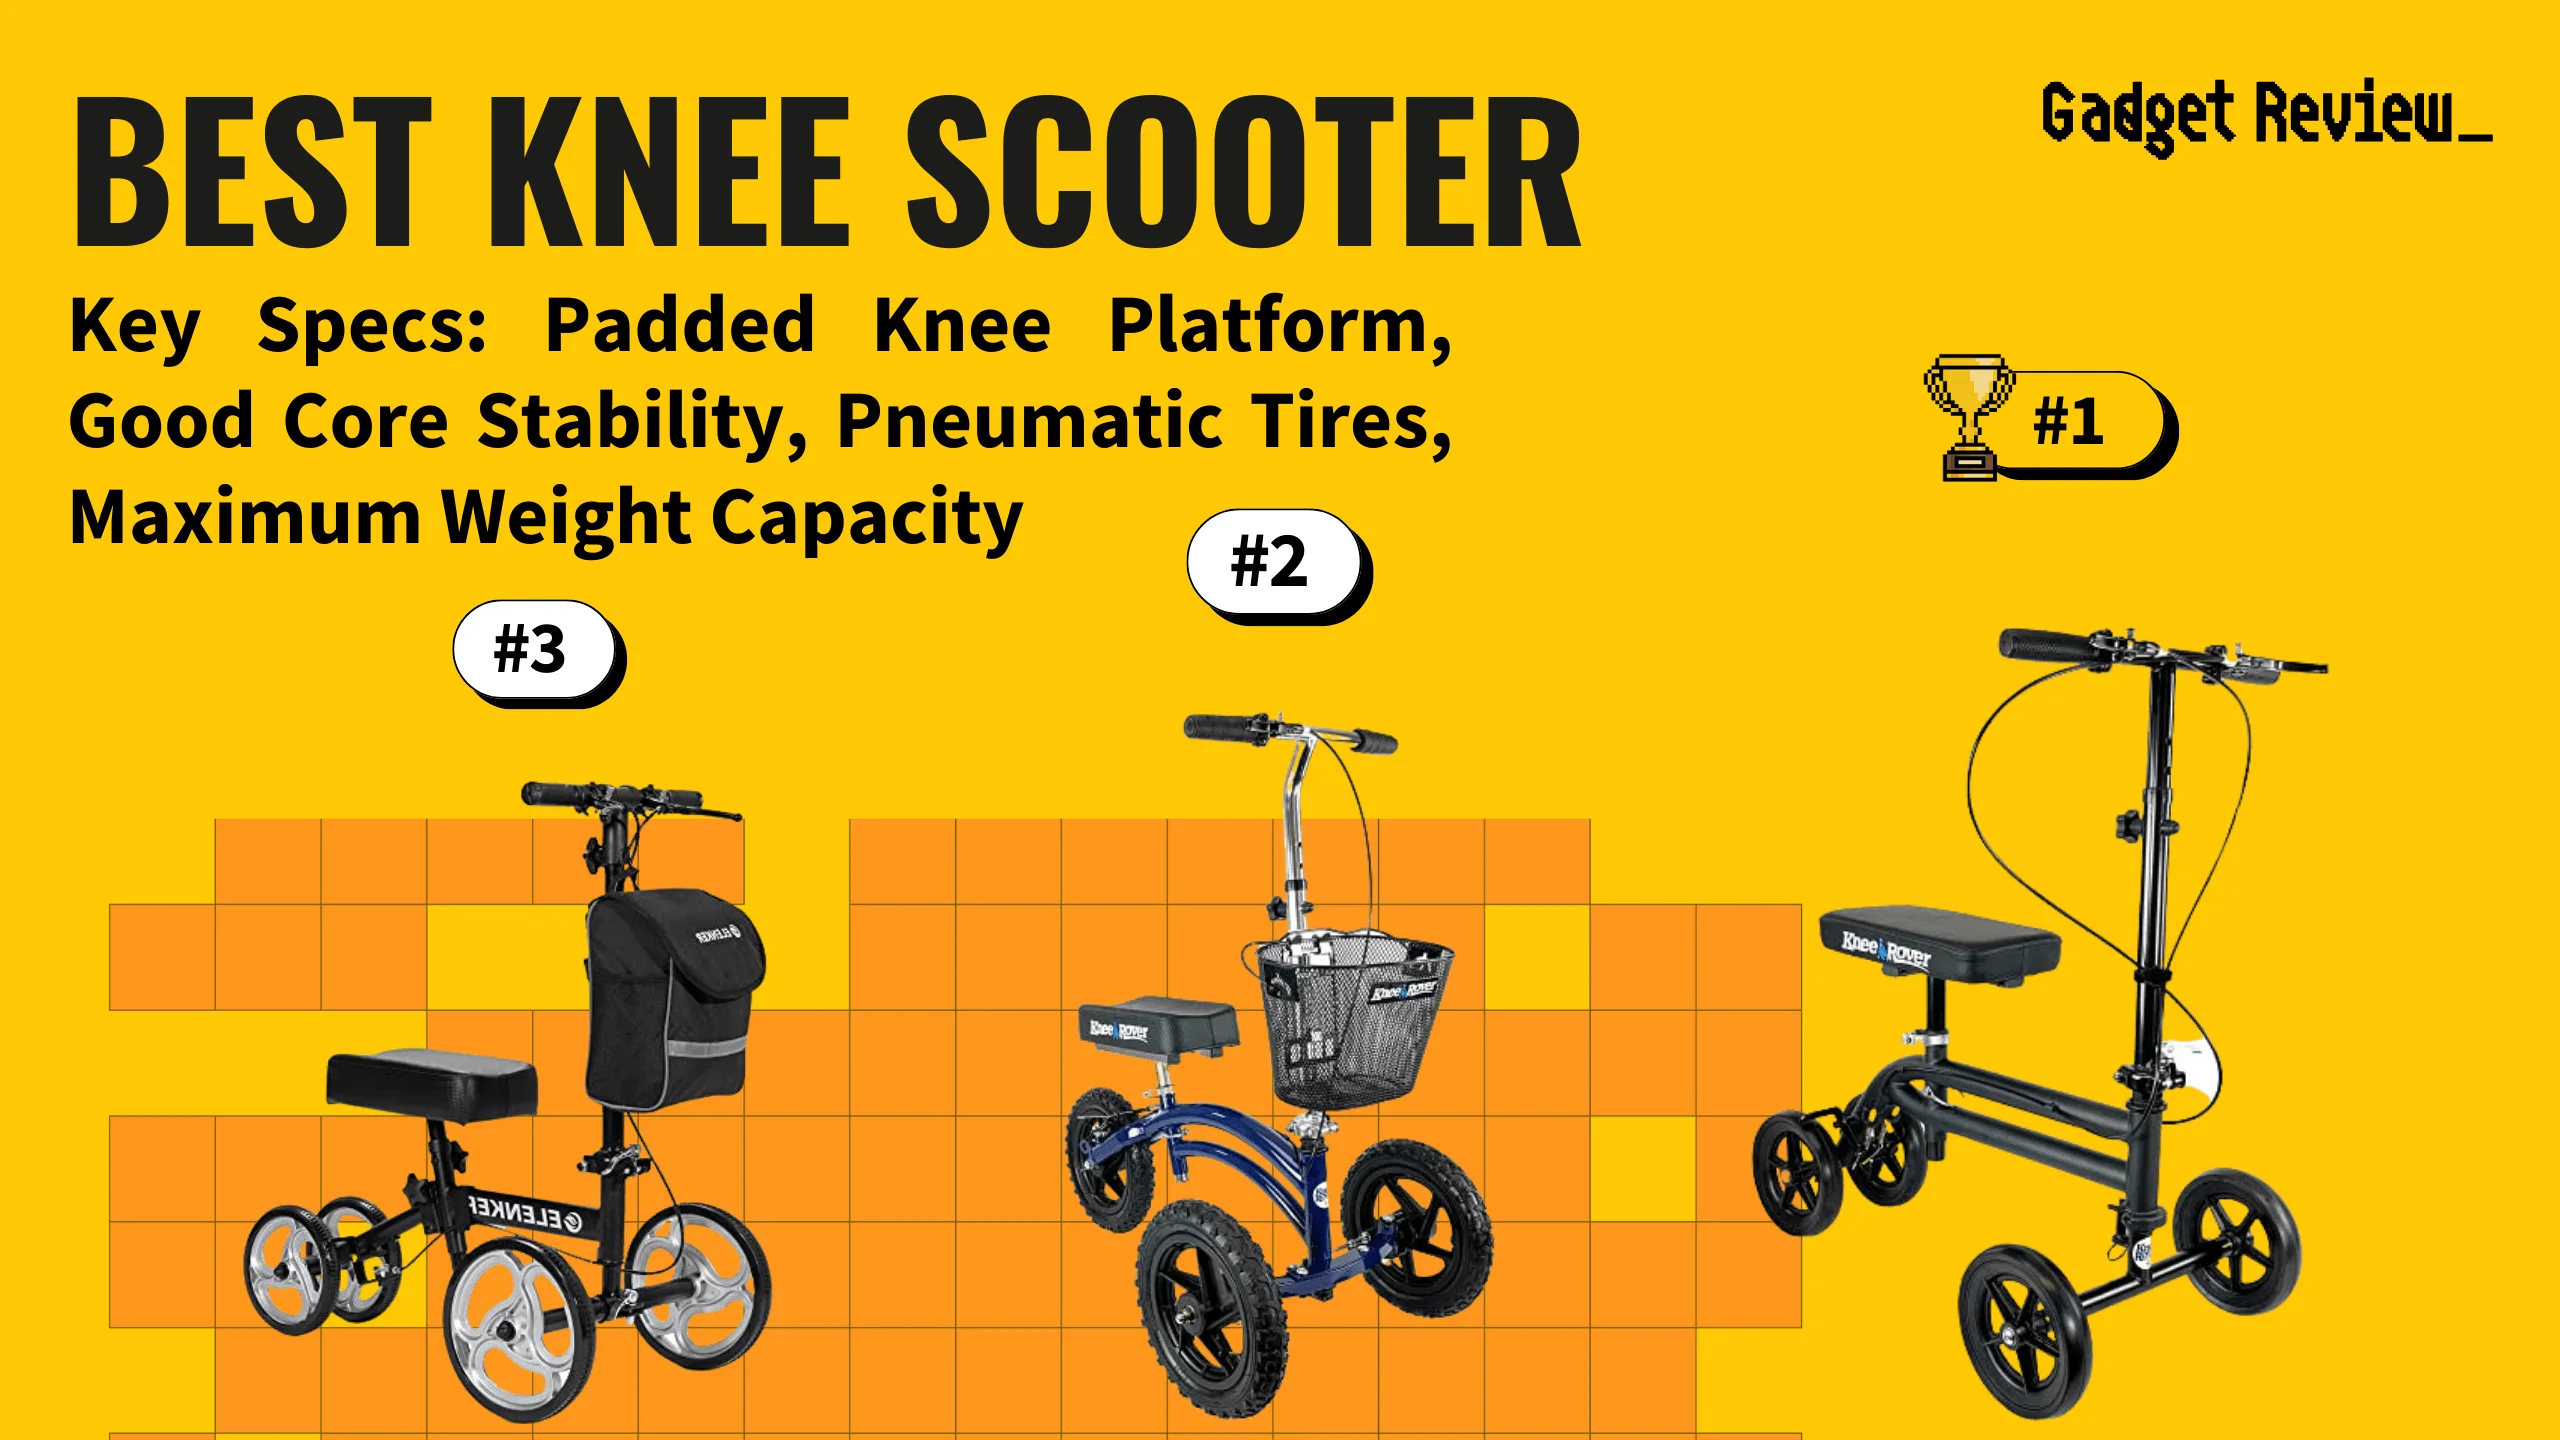 best knee scooter featured image that shows the top three best health & wellnes models